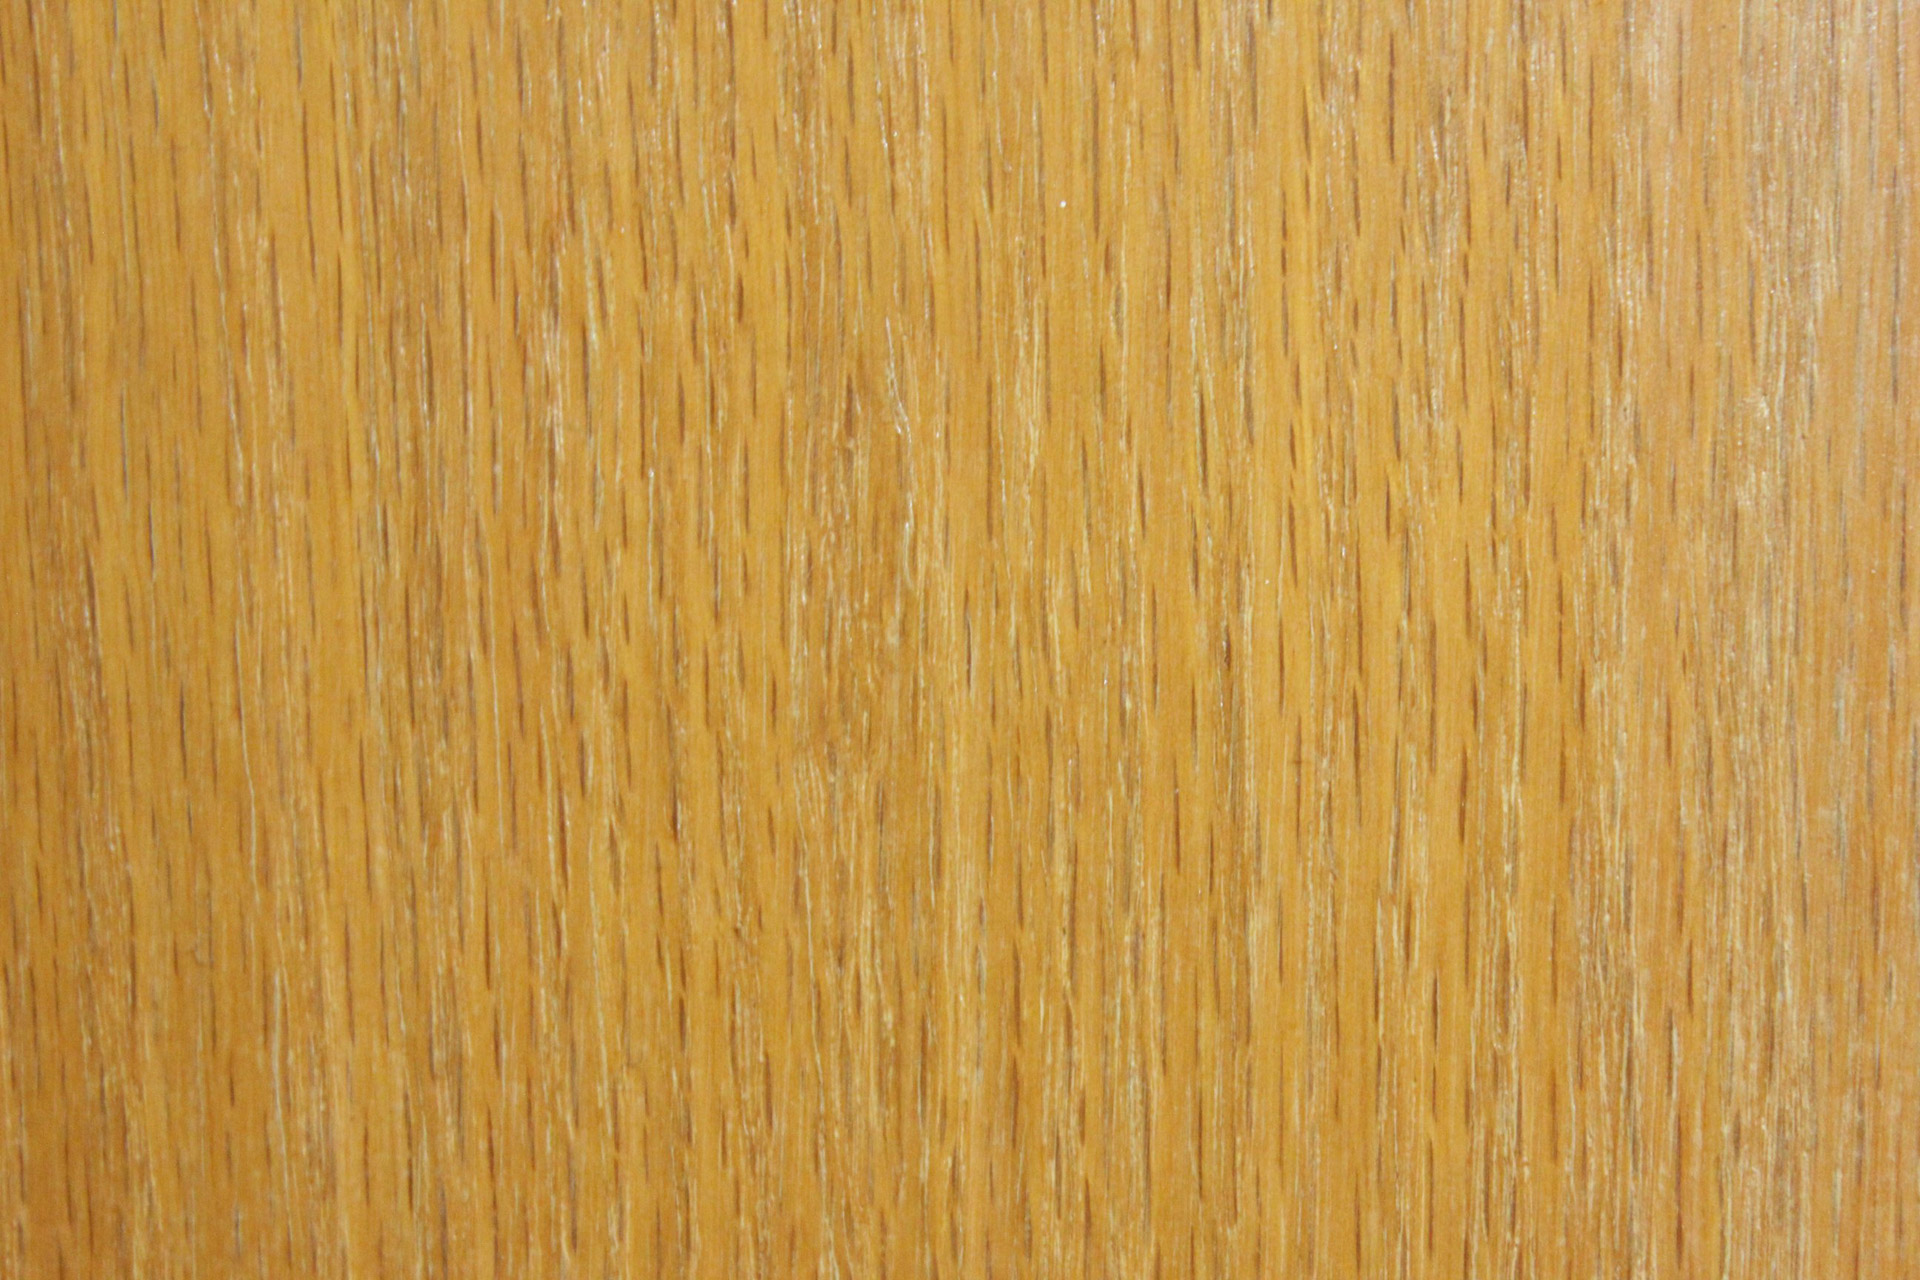 Wood Texture Pattern Free Stock Photo - Public Domain Pictures